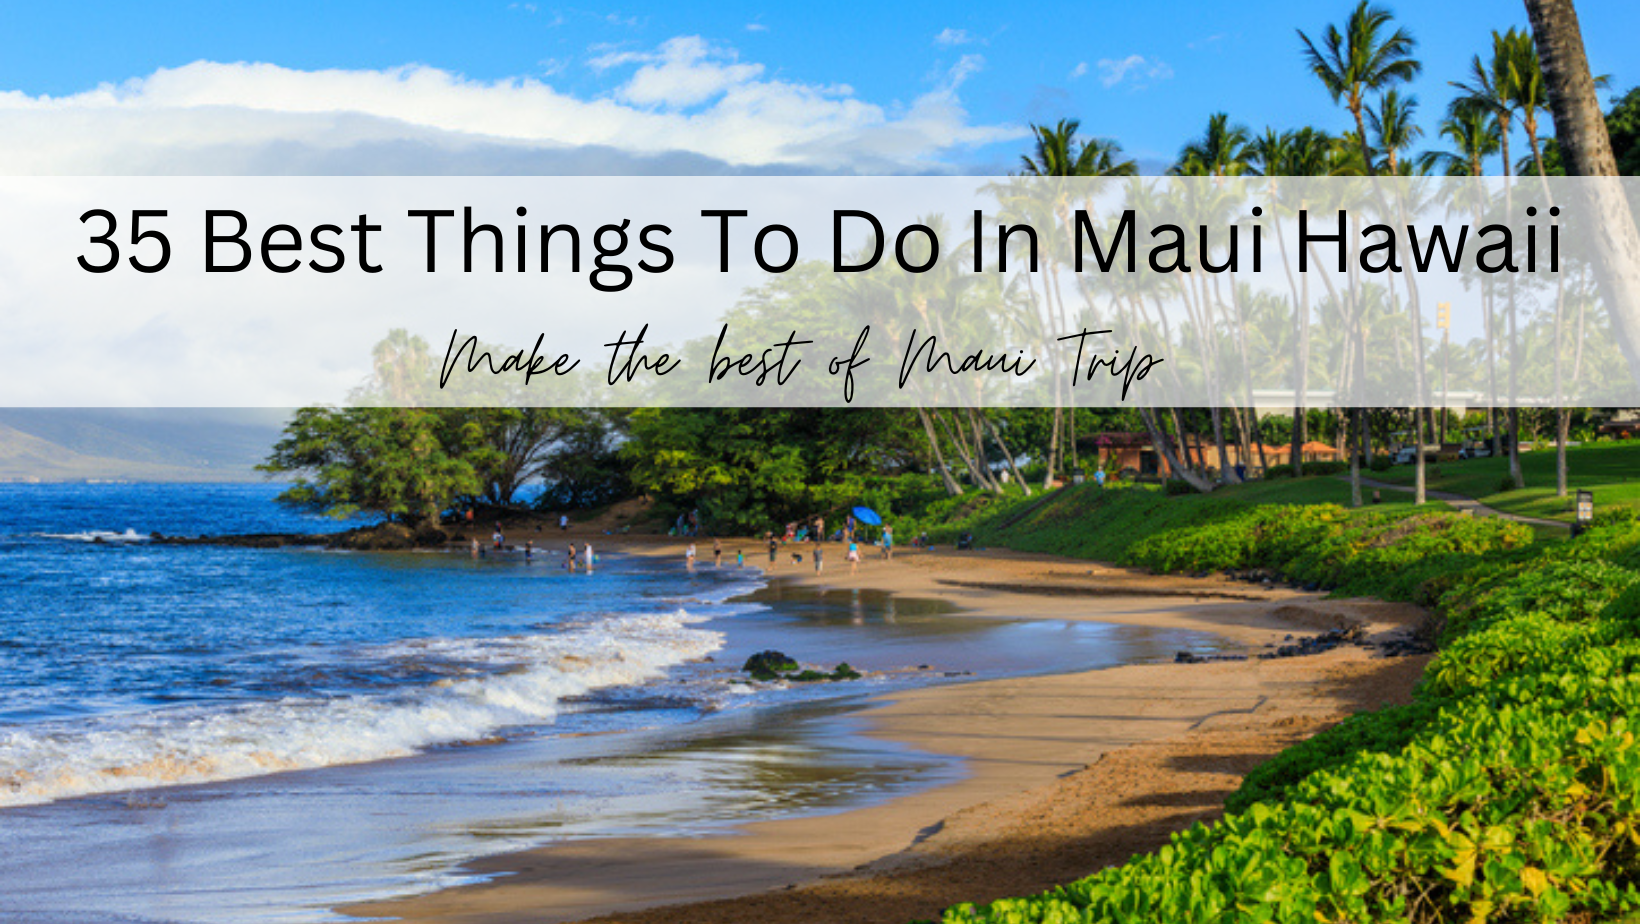 35 Best Things To Do In Maui Hawaii